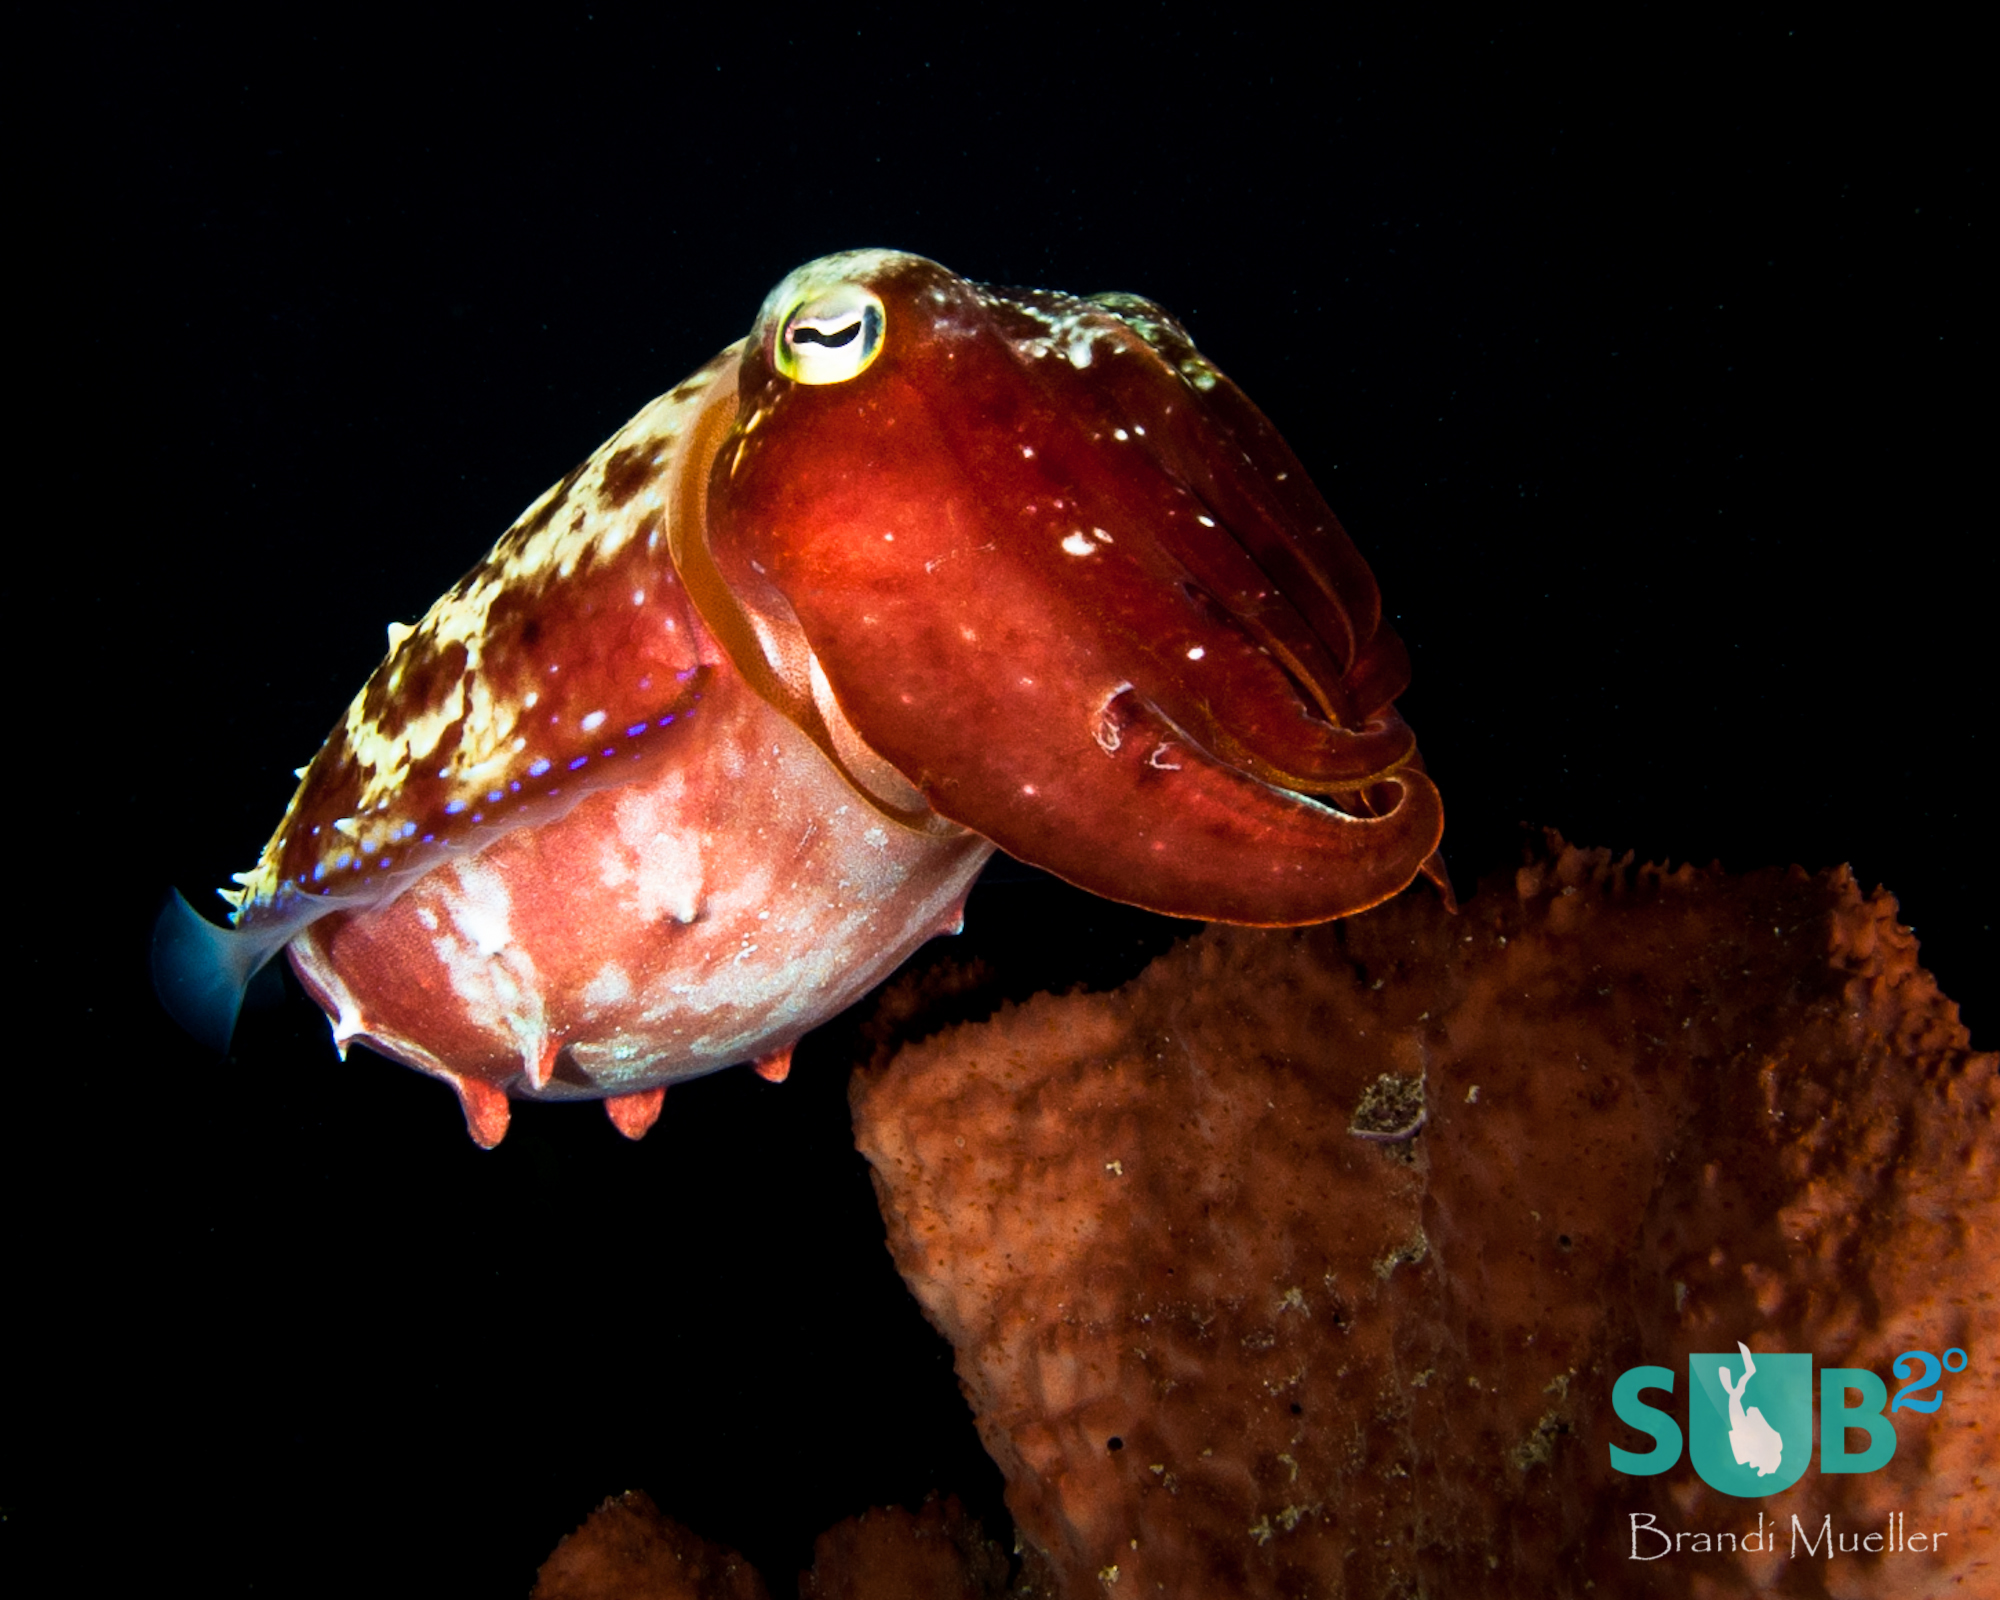 A cuttlefish tries to blend in with a sponge.  Once it knew it was found it flashed many colors including reds, yellows, and blues.